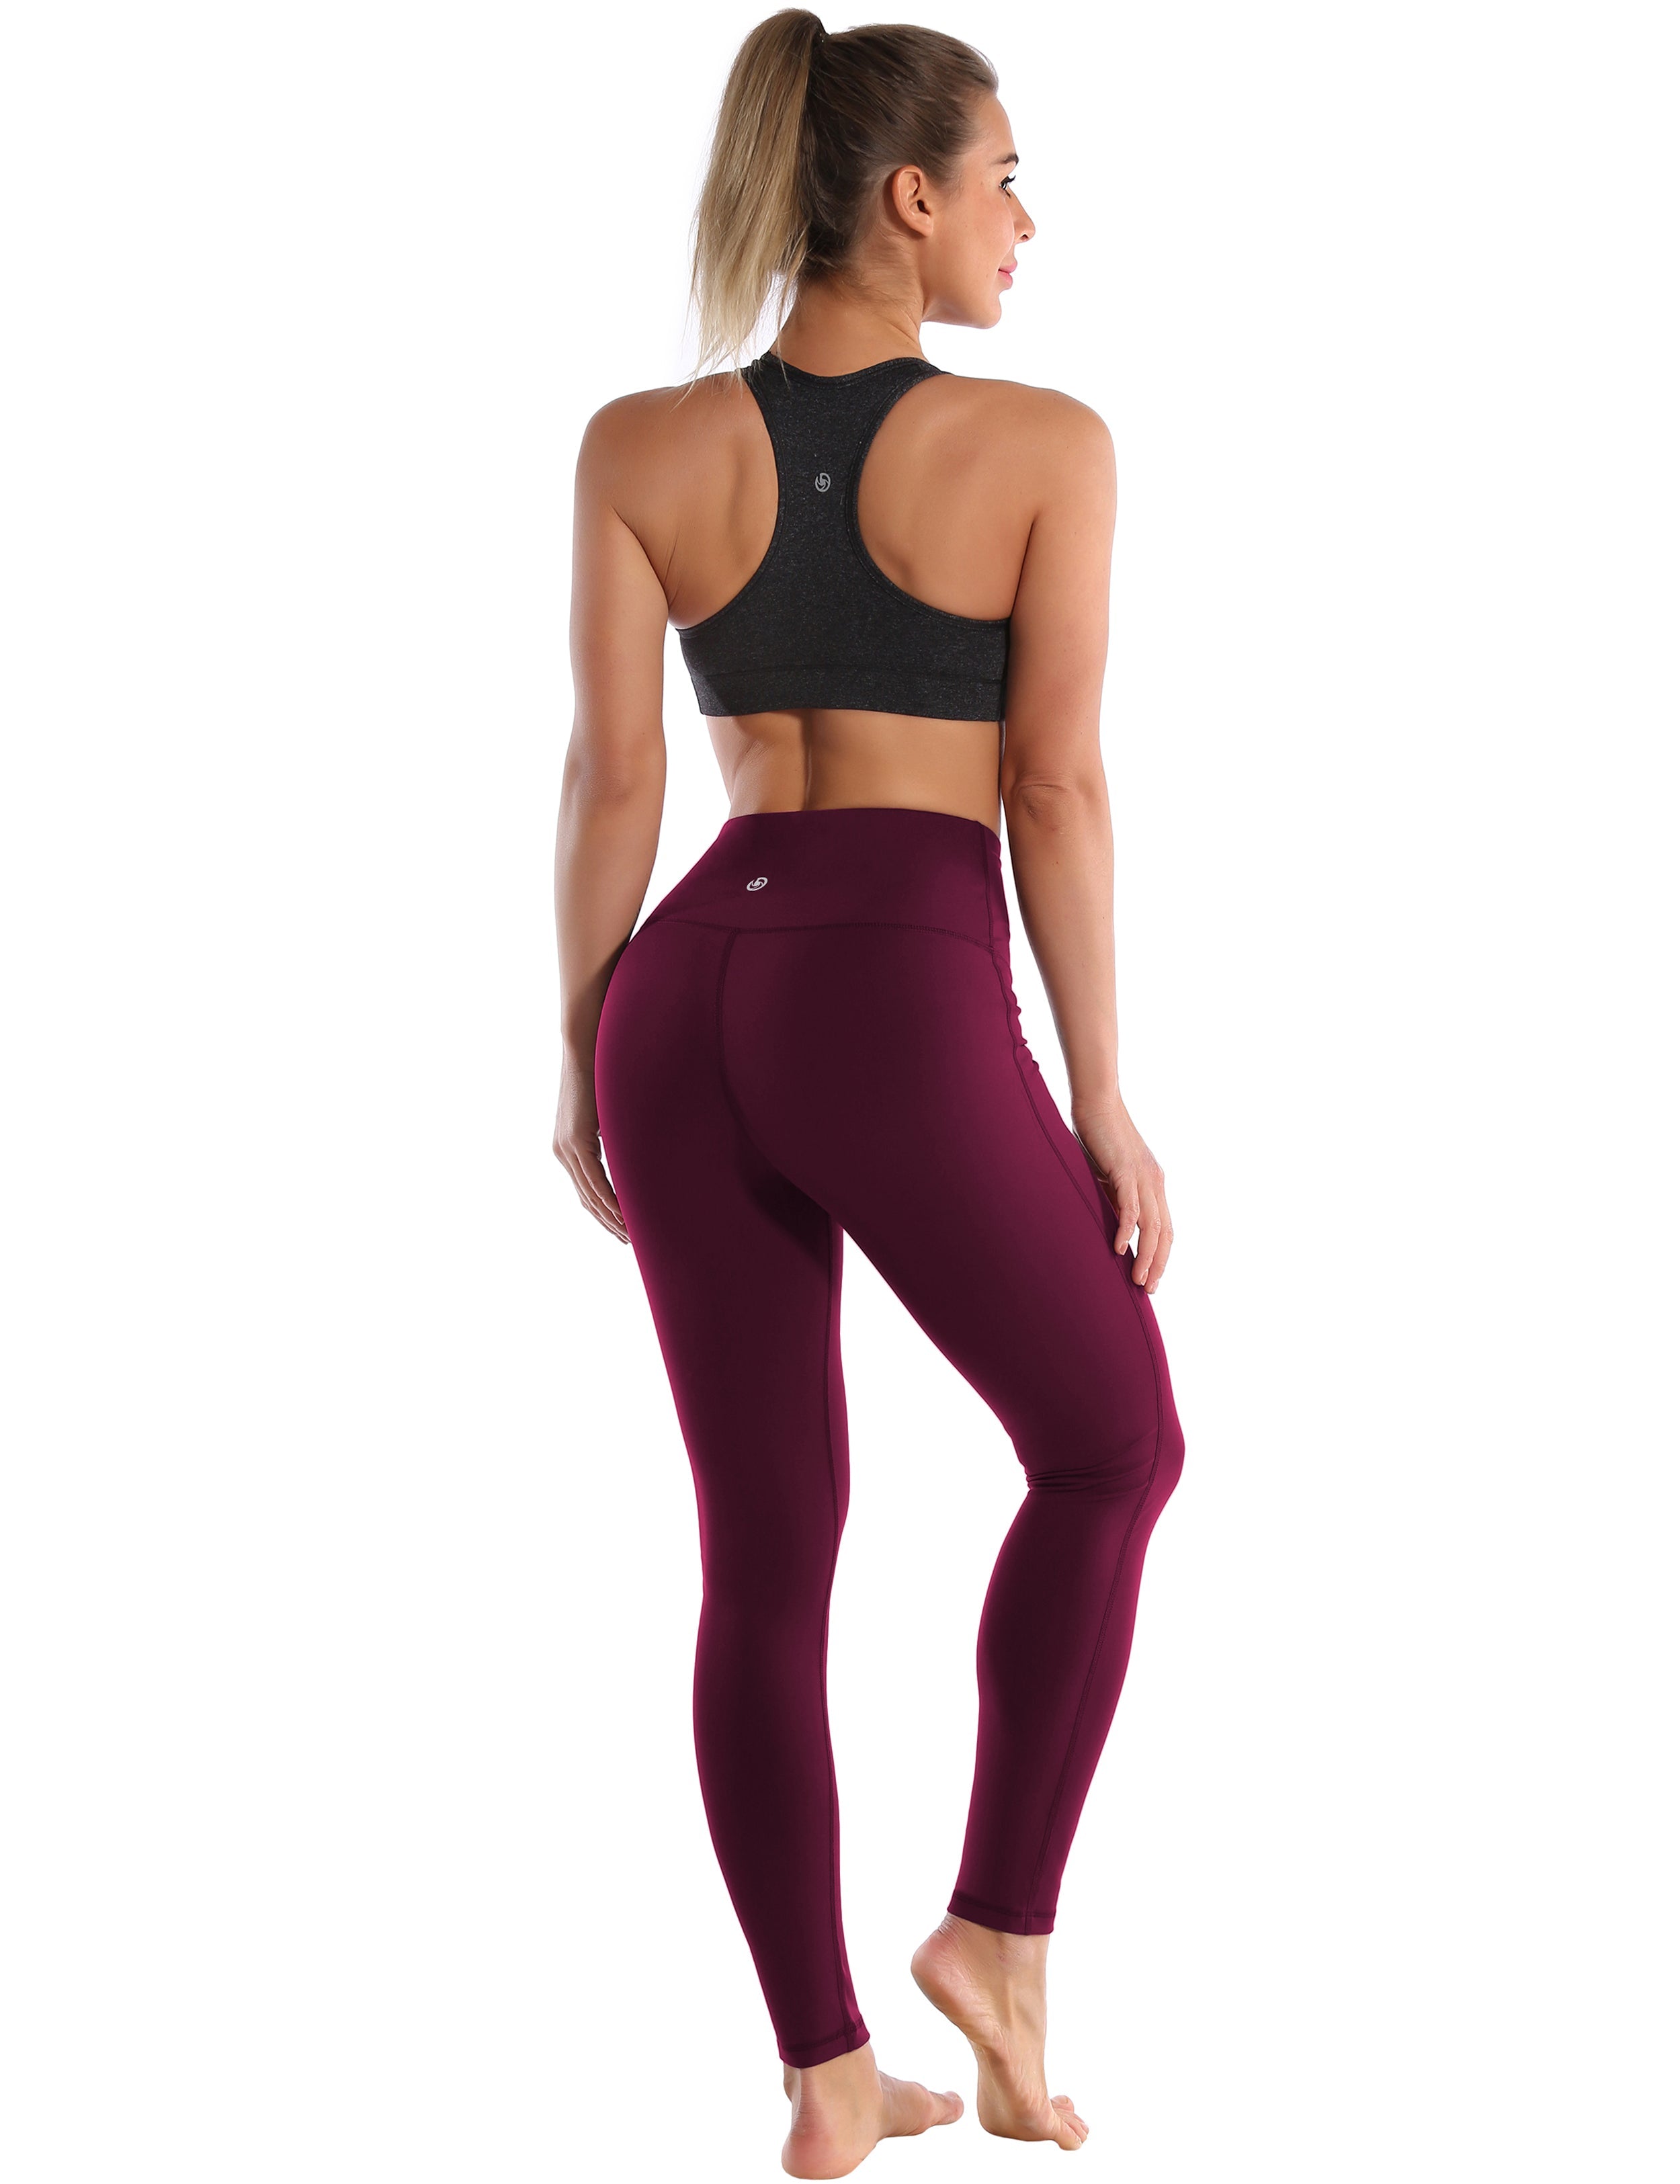 High Waist Side Line Yoga Pants grapevine Side Line is Make Your Legs Look Longer and Thinner 75%Nylon/25%Spandex Fabric doesn't attract lint easily 4-way stretch No see-through Moisture-wicking Tummy control Inner pocket Two lengths